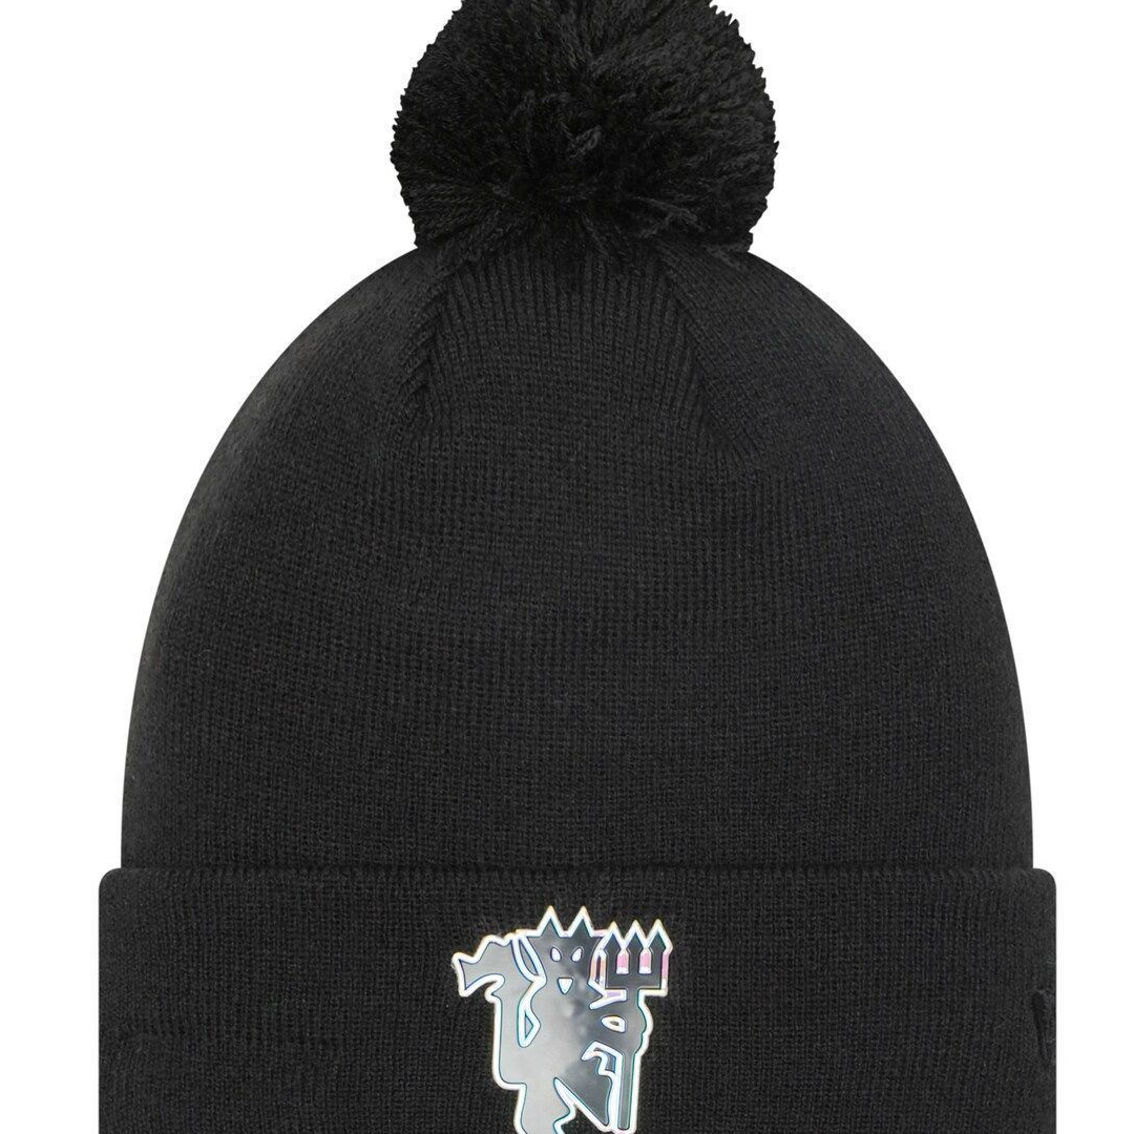 Men's New Era Black Manchester United Iridescent Cuffed Knit Hat with Pom - Image 2 of 3